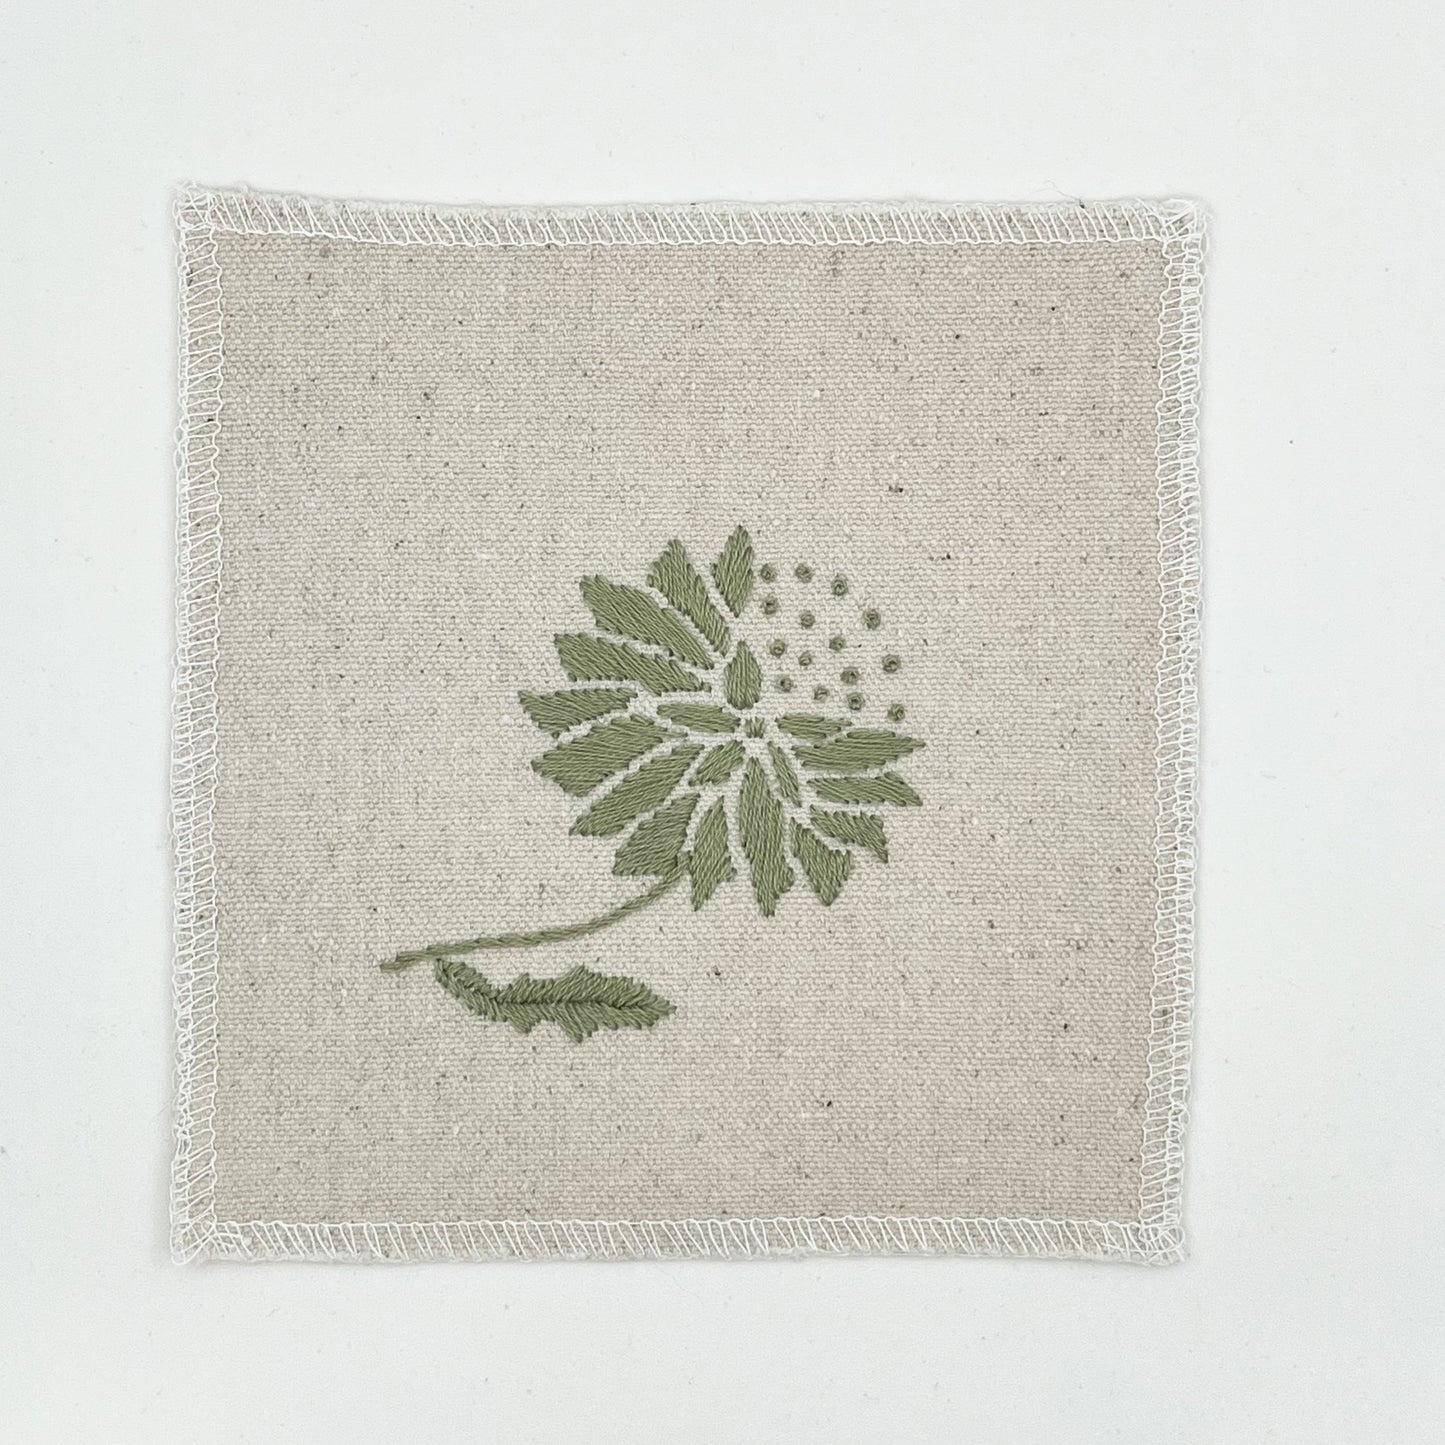 a square patch in natural colored fabric, hand embroidered with a sage colored abstract dandelion made mostly of petals, with a quarter of them replaced with french knots, with overlocked edges, on a white background